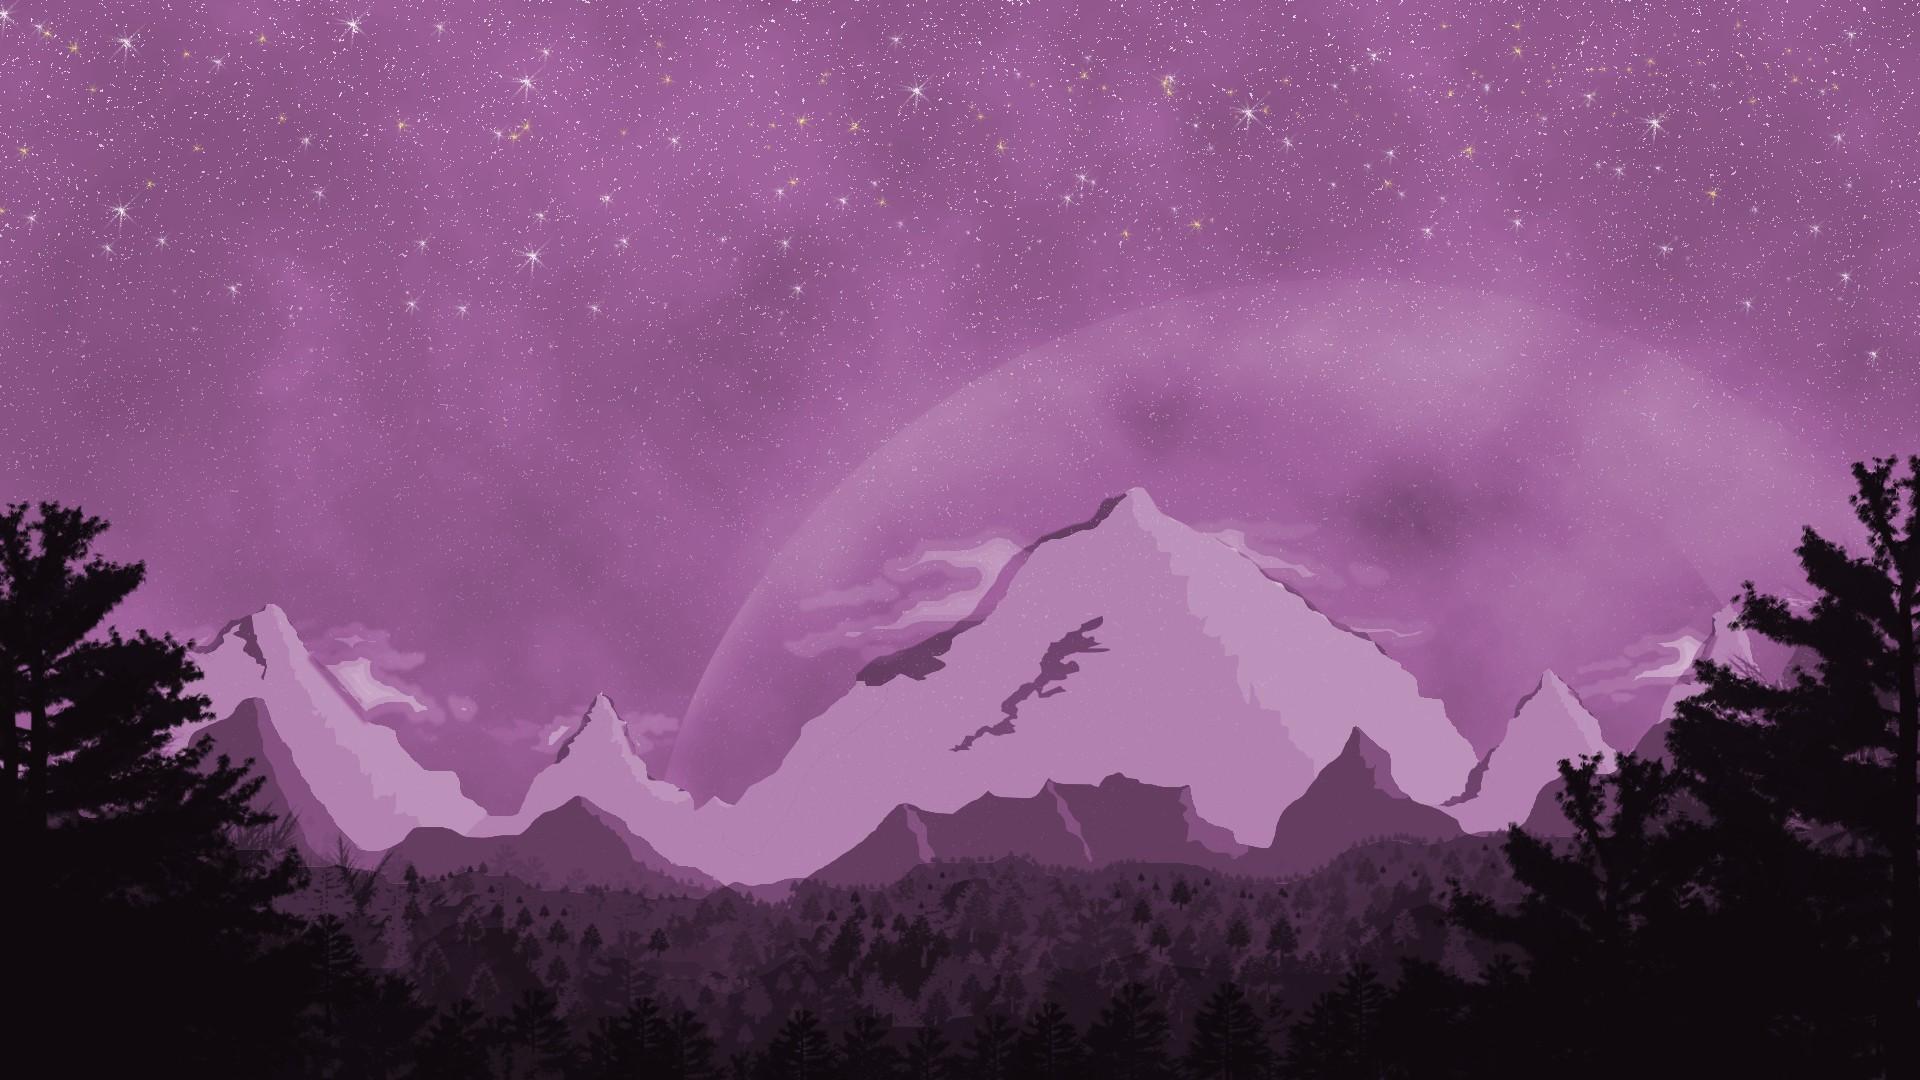 Pink Mountain Abstract HD Wallpaper 1920x1080 (1080p)